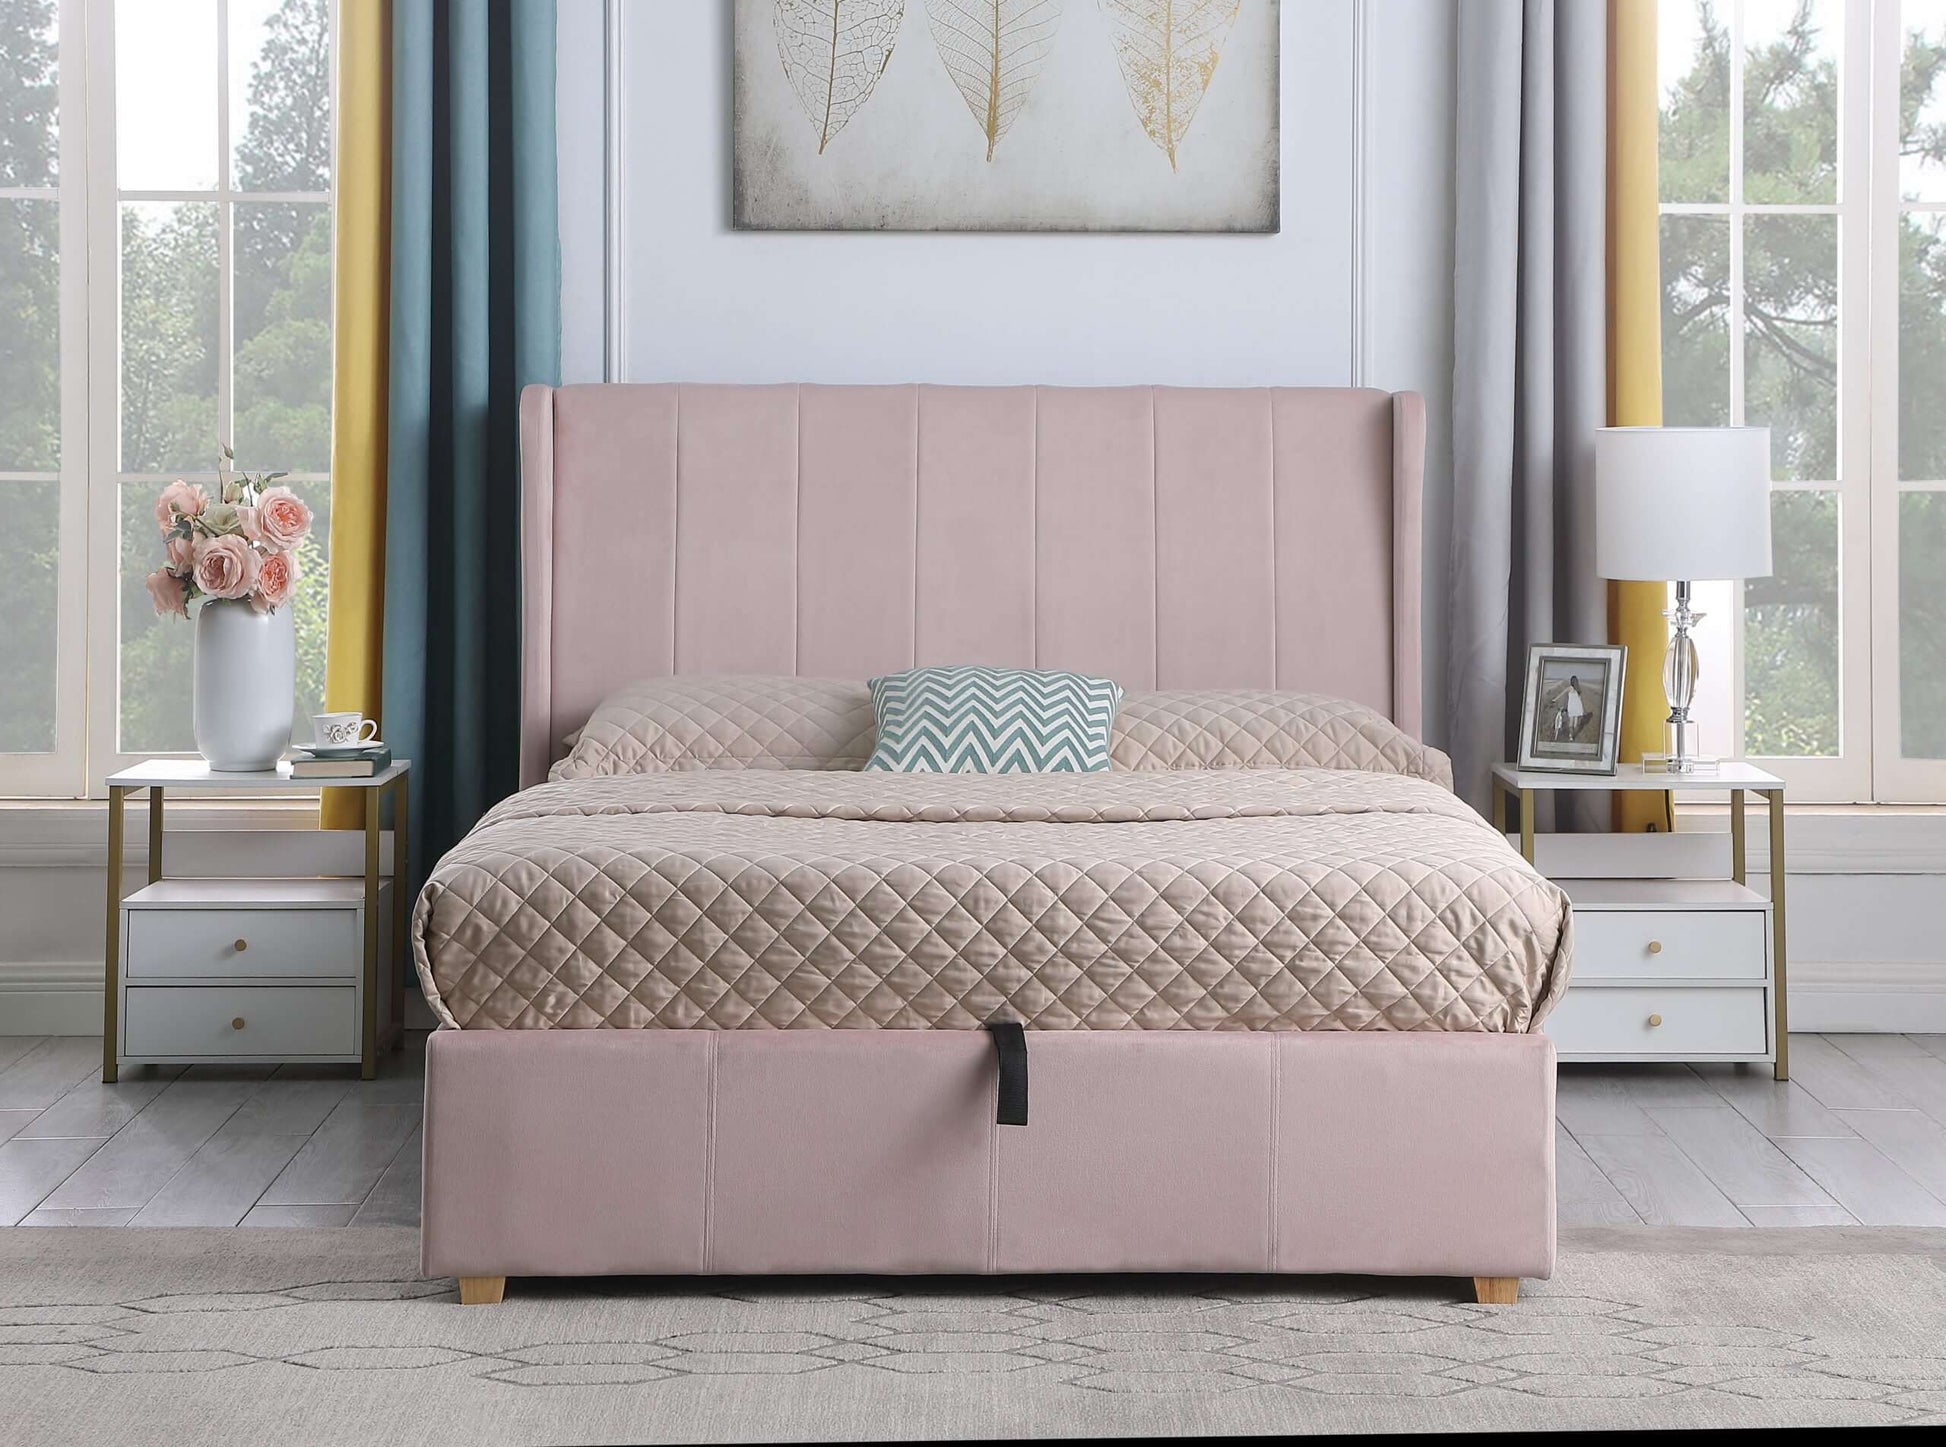 Amelia Plus 4'6" Storage Bed Pink Velvet Fabric- The Right Buy Store